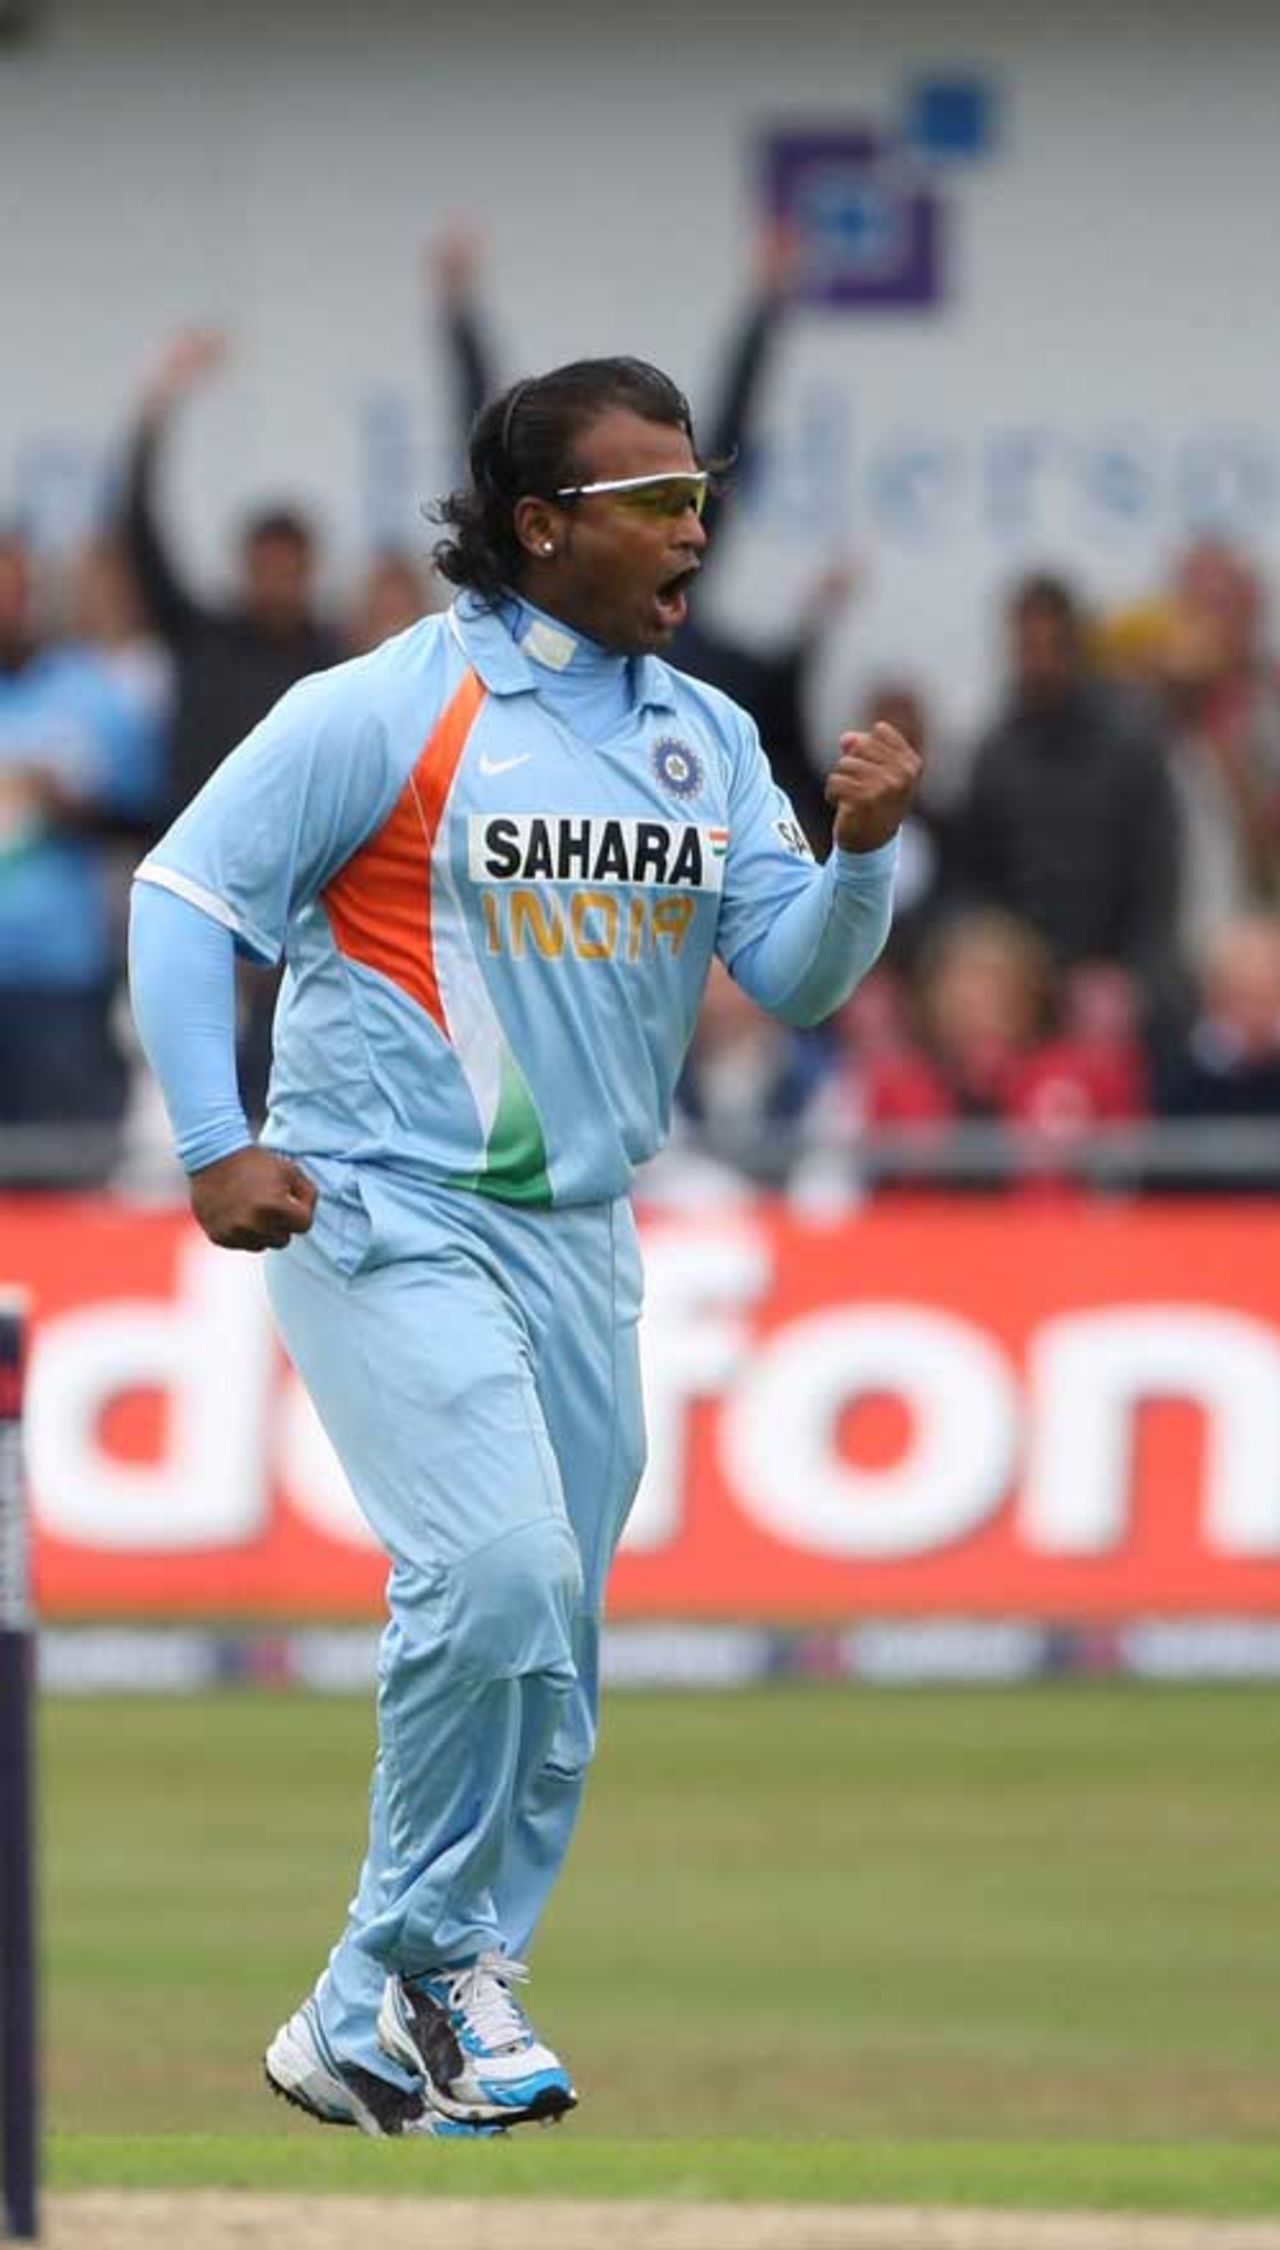 Ramesh Powar of India celebrates the wicket of Owais Shah of England during the fifth NatWest One Day International between England and India at Headingley on September 2, 2007 in Leeds, England